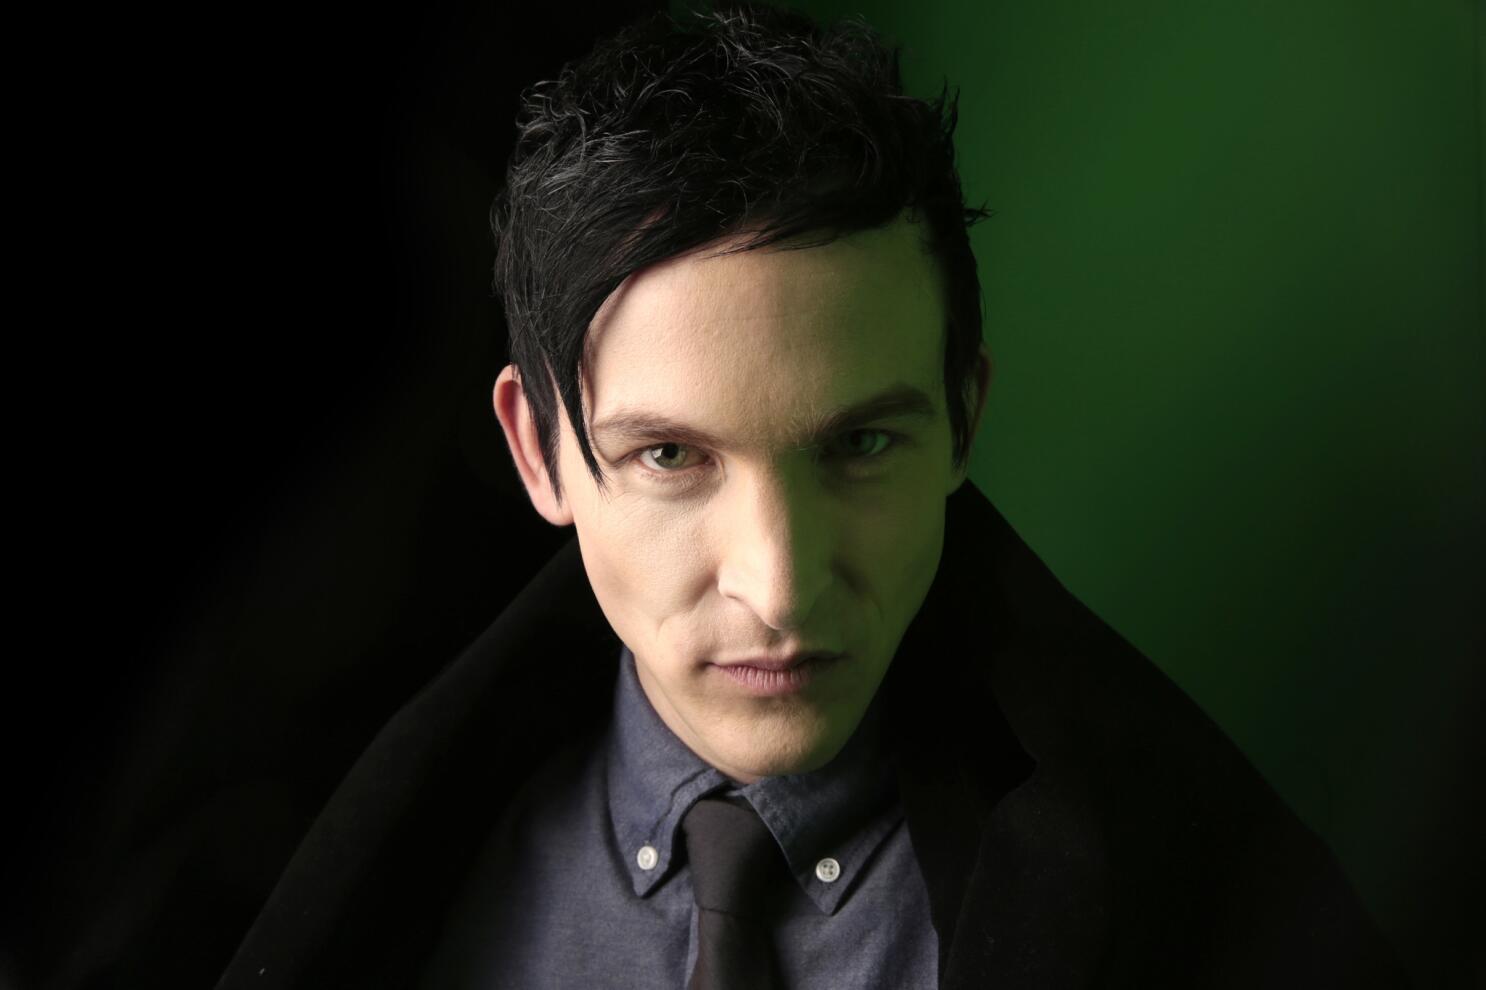 Gotham's Robin Lord Taylor has a small but important role in John Wick:  Chapter 3 - Parabellum